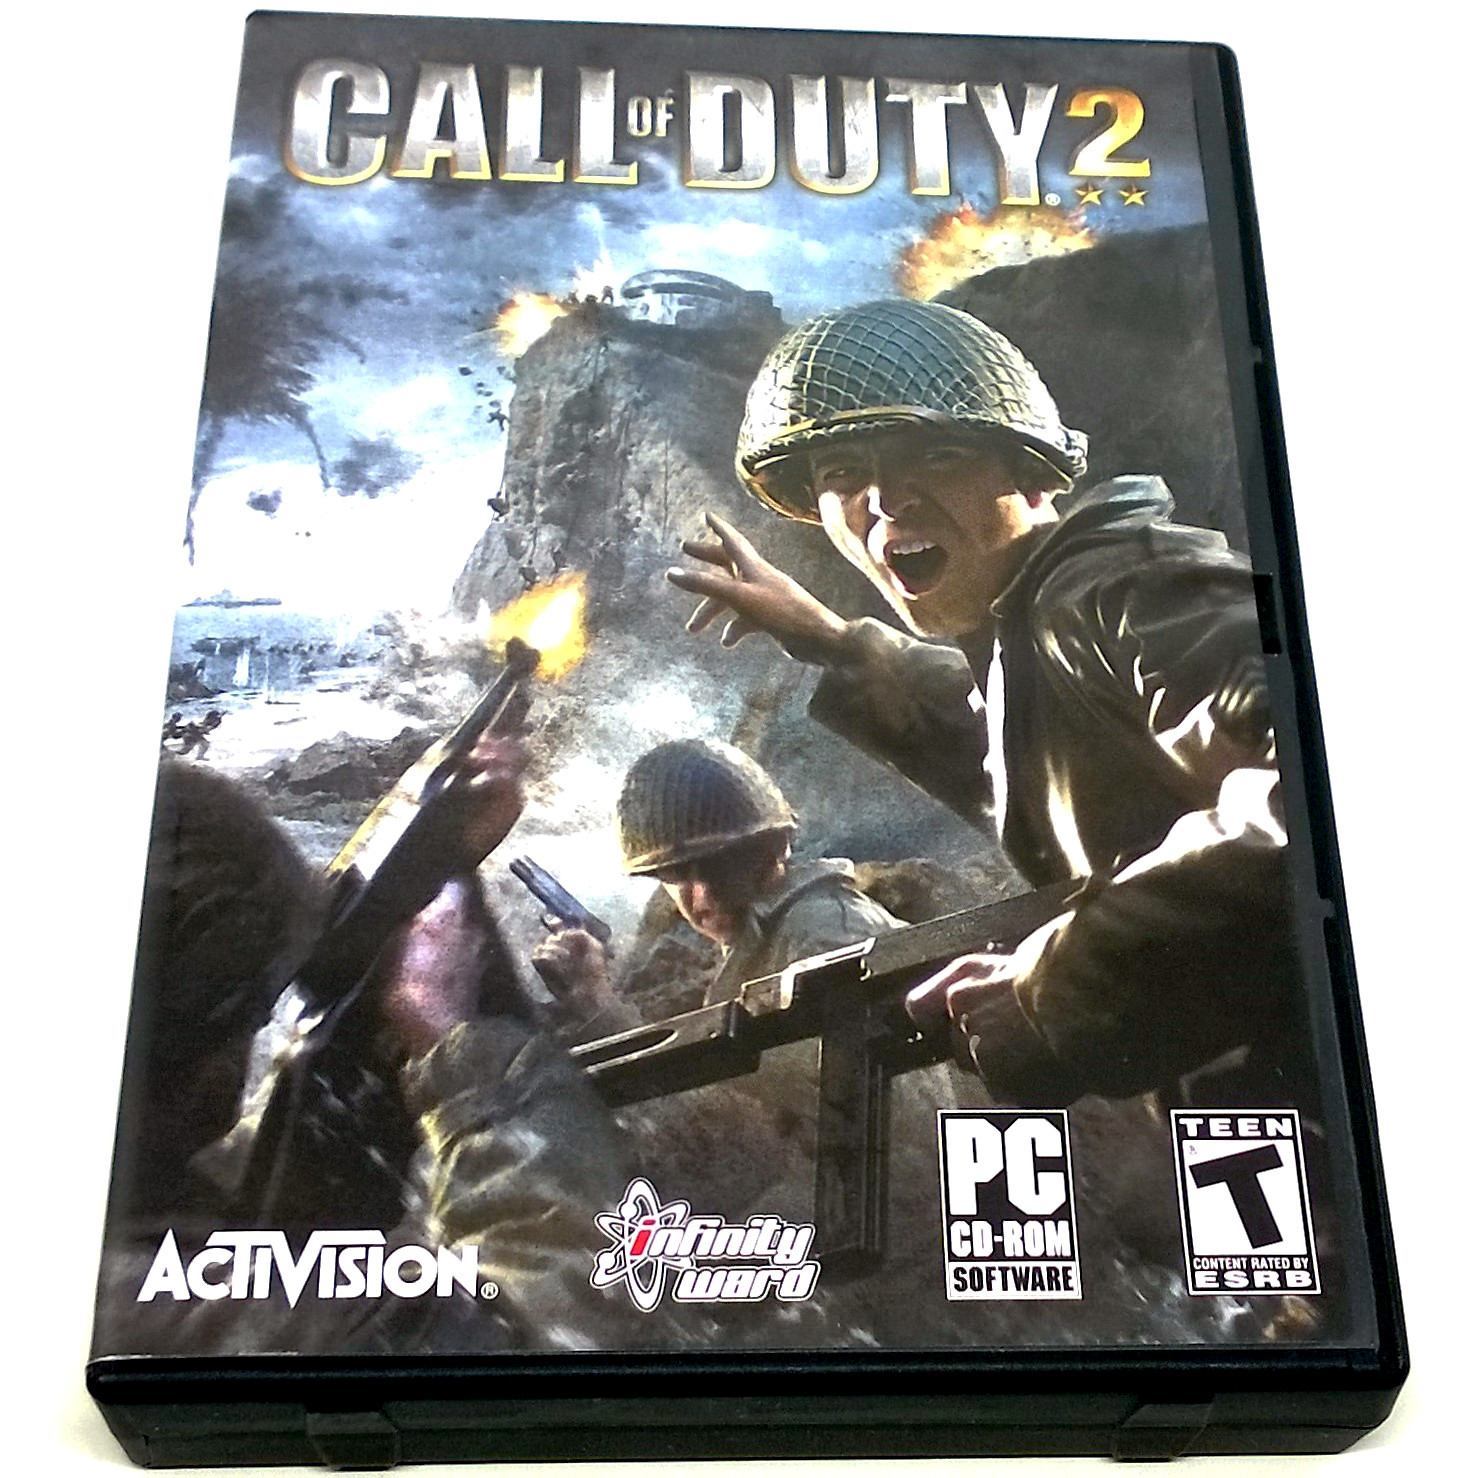 Call of Duty 2 for PC CD-ROM - Front of case